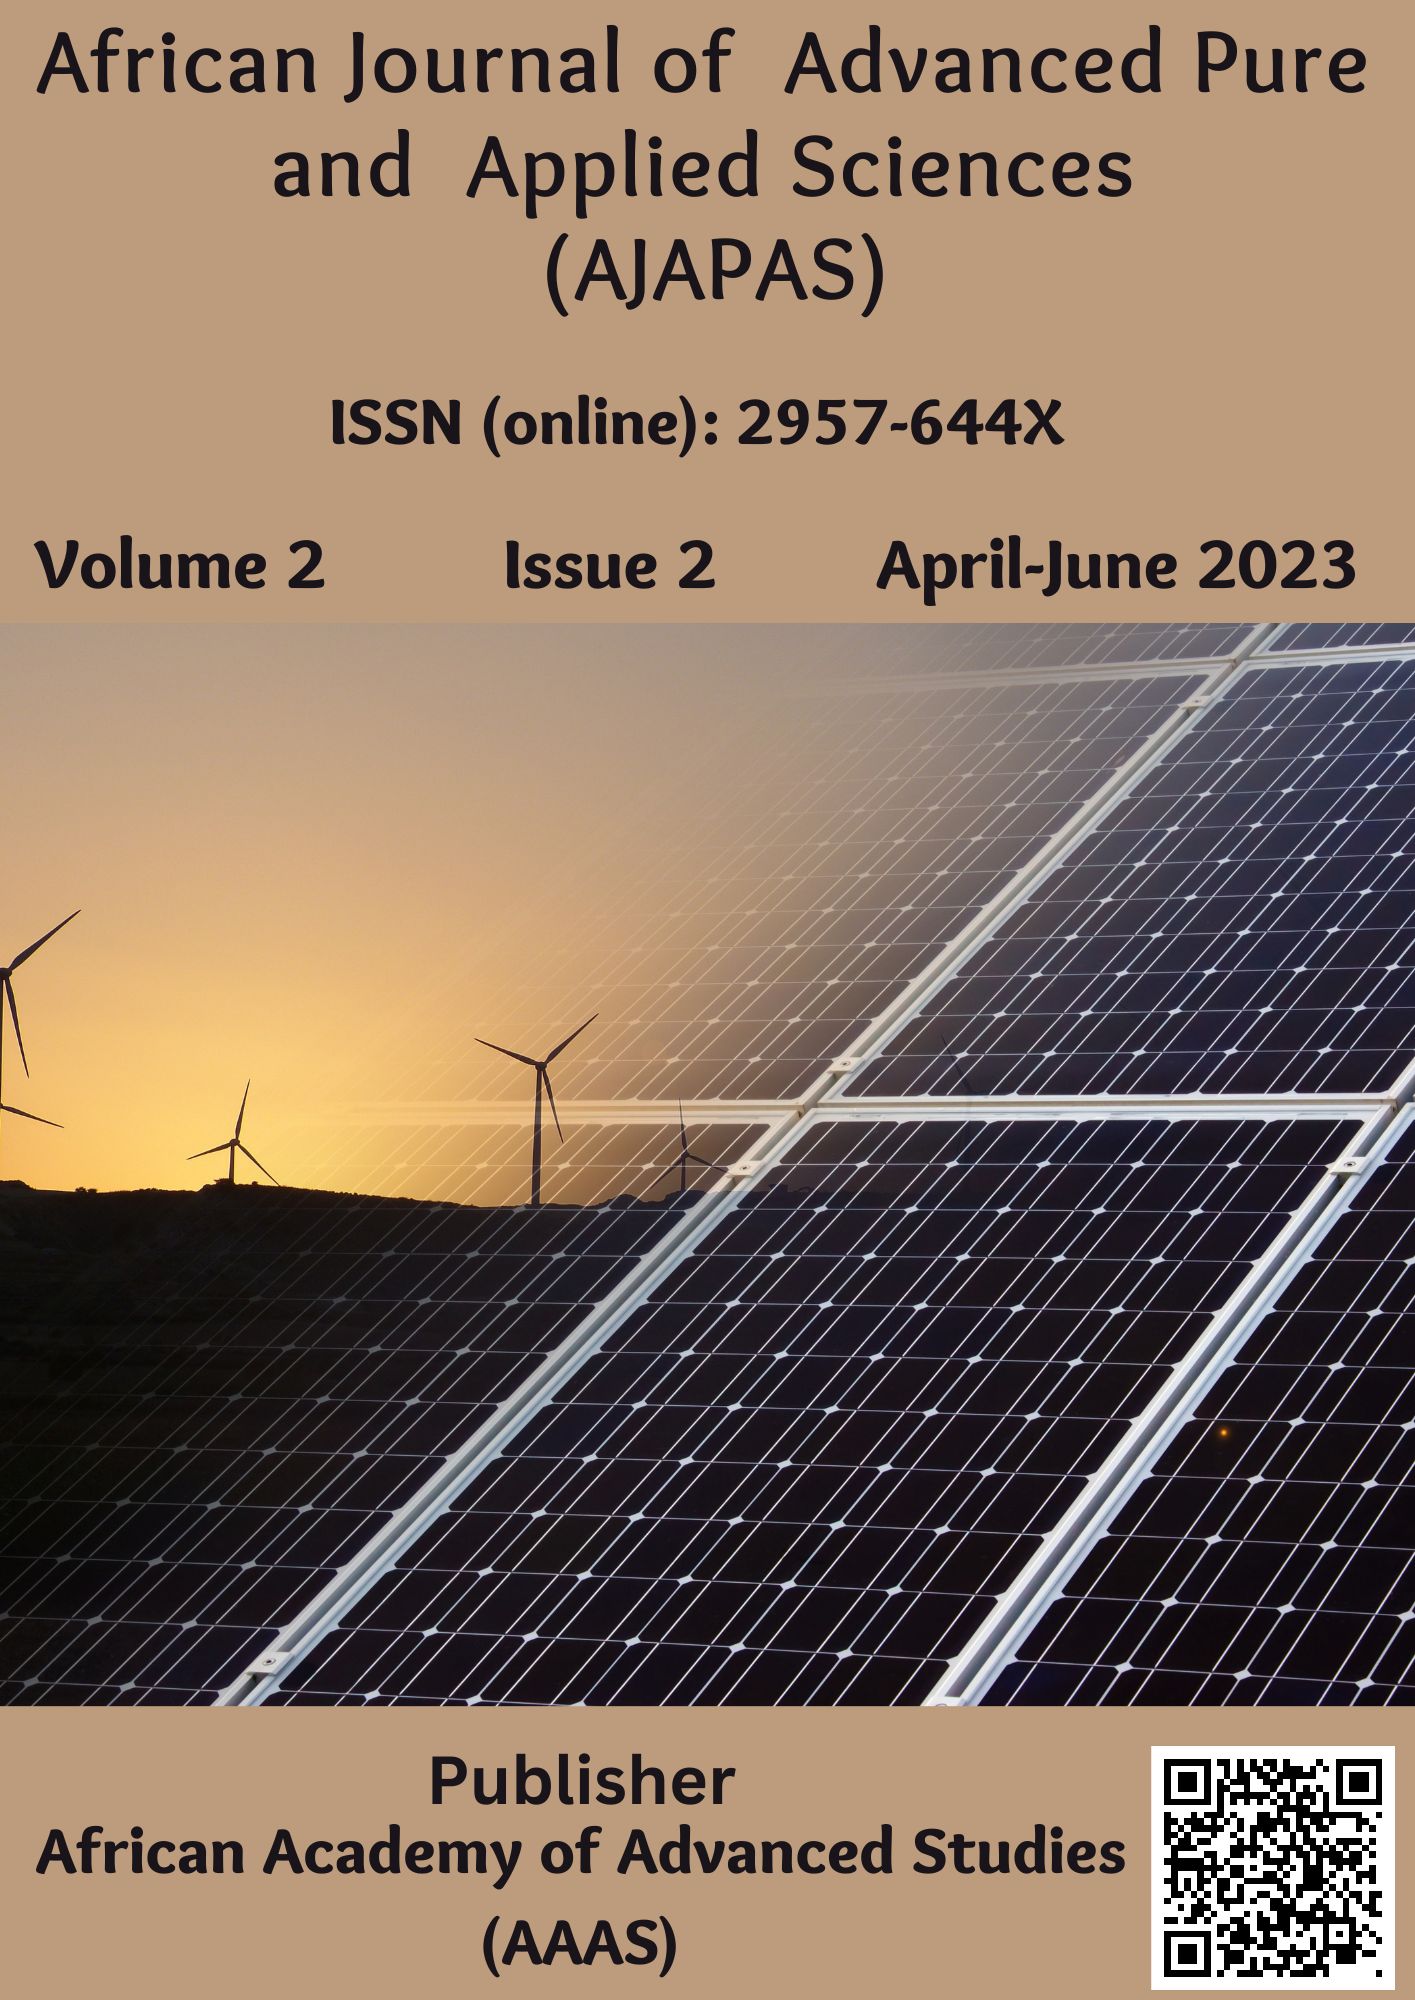 					View Volume 2, Issue 2, April-June 2023
				